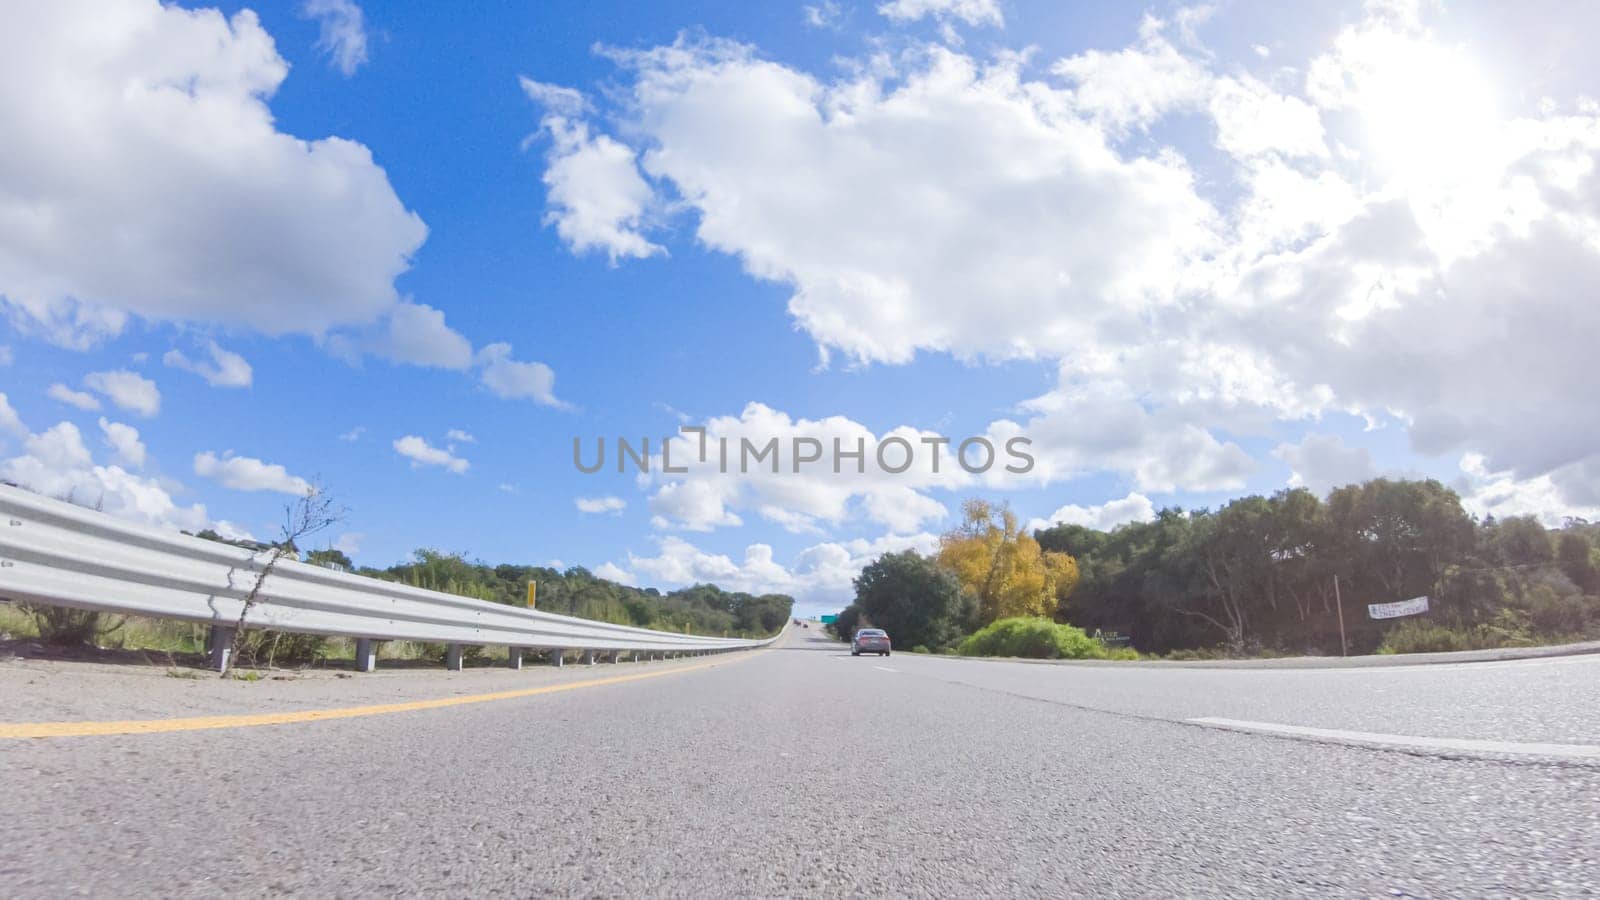 On a clear winter day, a car smoothly travels along Highway 101 near Santa Maria, California, under a brilliant blue sky, surrounded by a blend of greenery and golden hues.